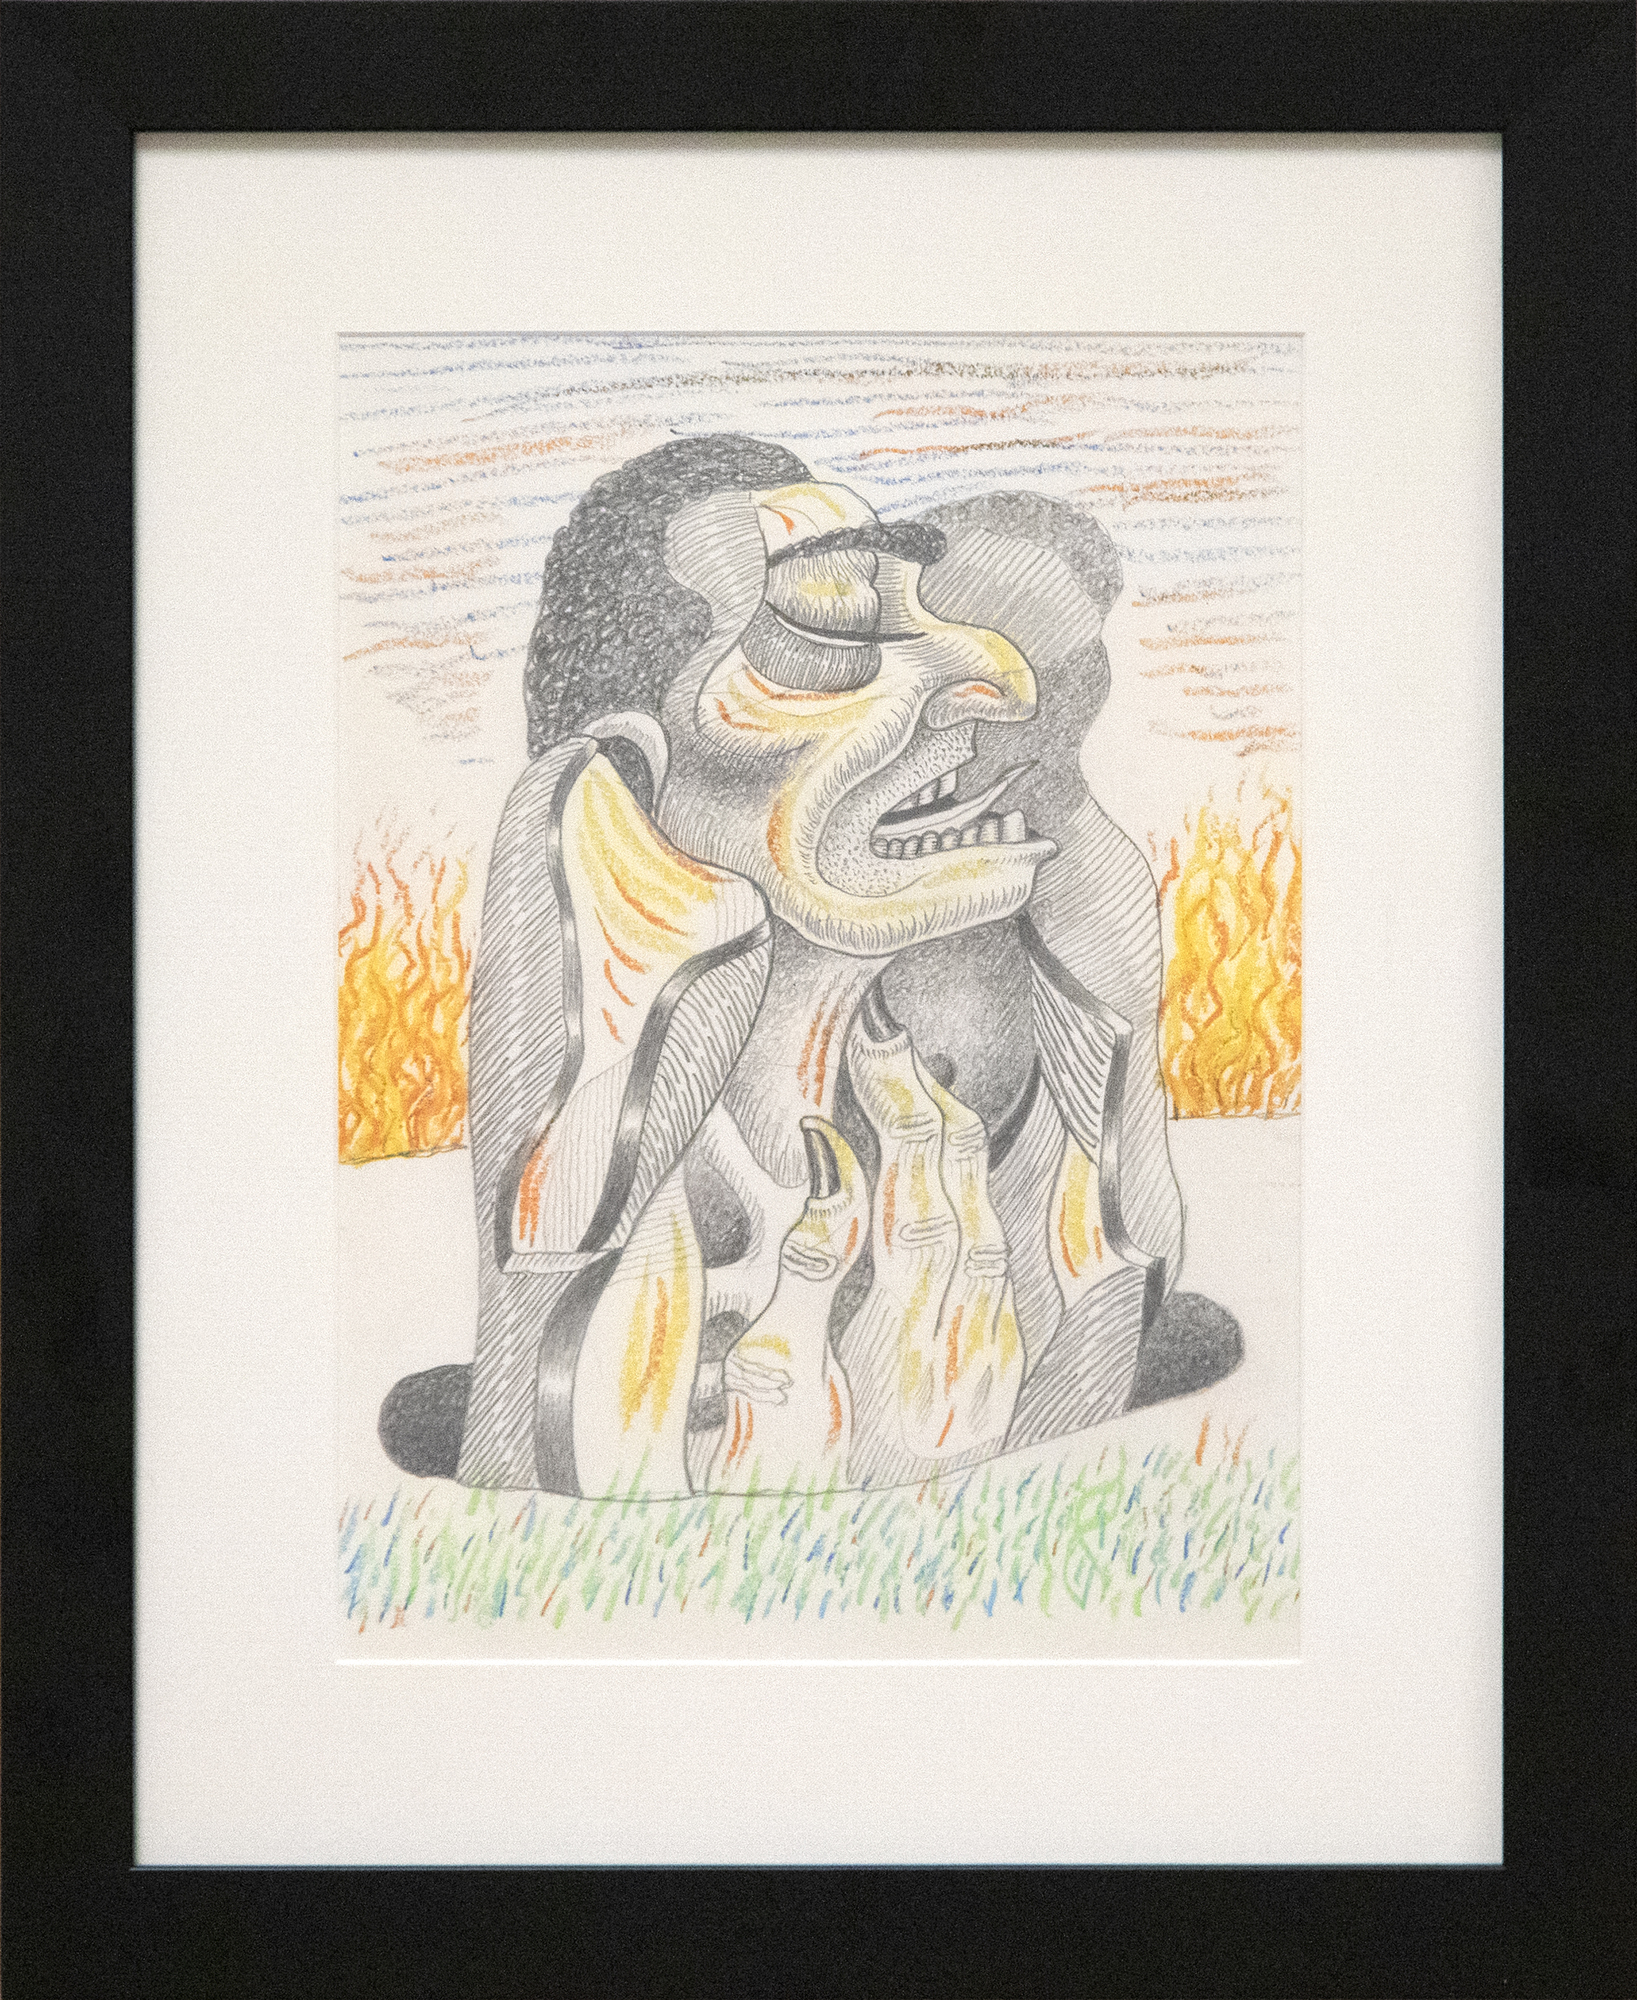 IRVING NORMAN - Untitled - graphite and crayon on paper - 12 x 8 7/8 in.